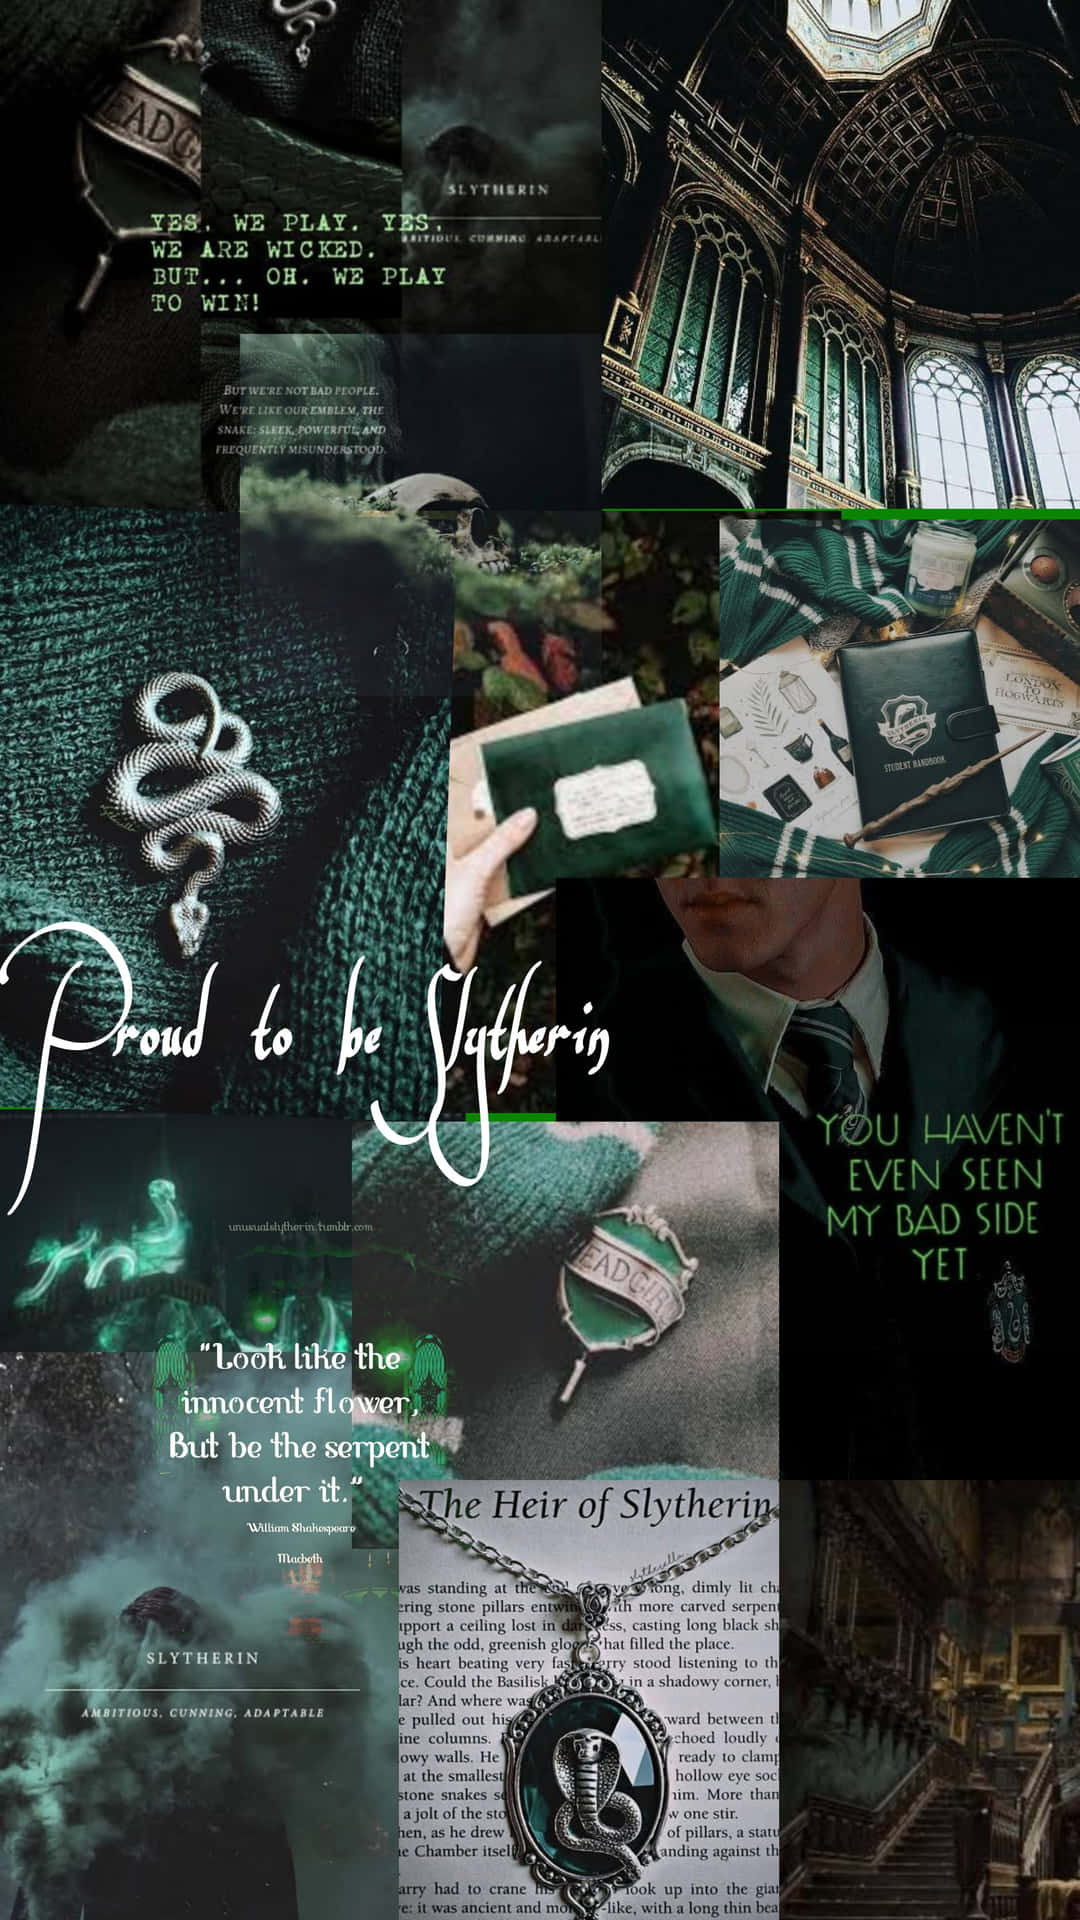 All Hail the House of Slytherin!